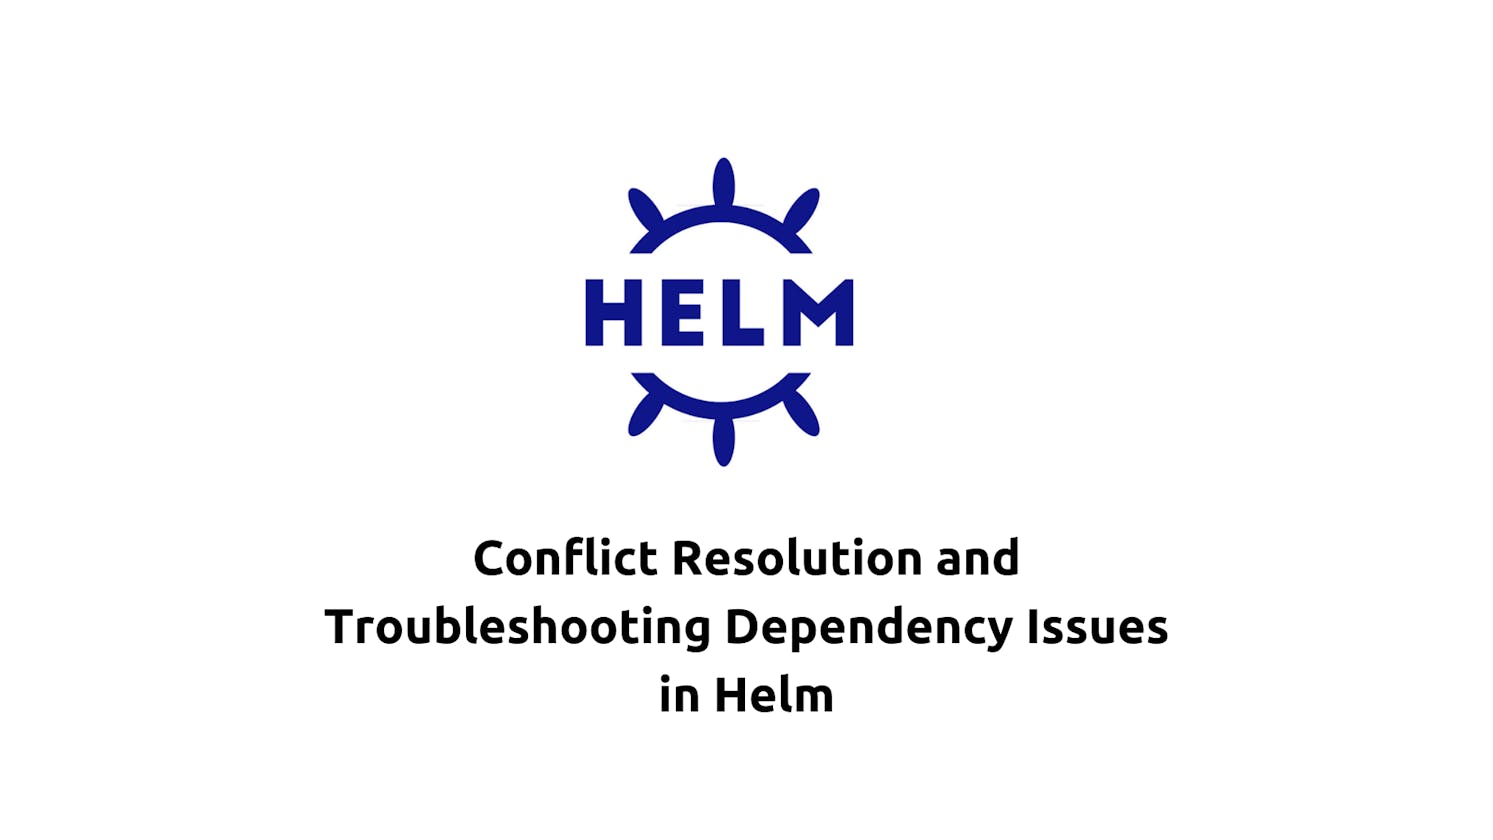 Conflict Resolution and Troubleshooting Dependency Issues in Helm